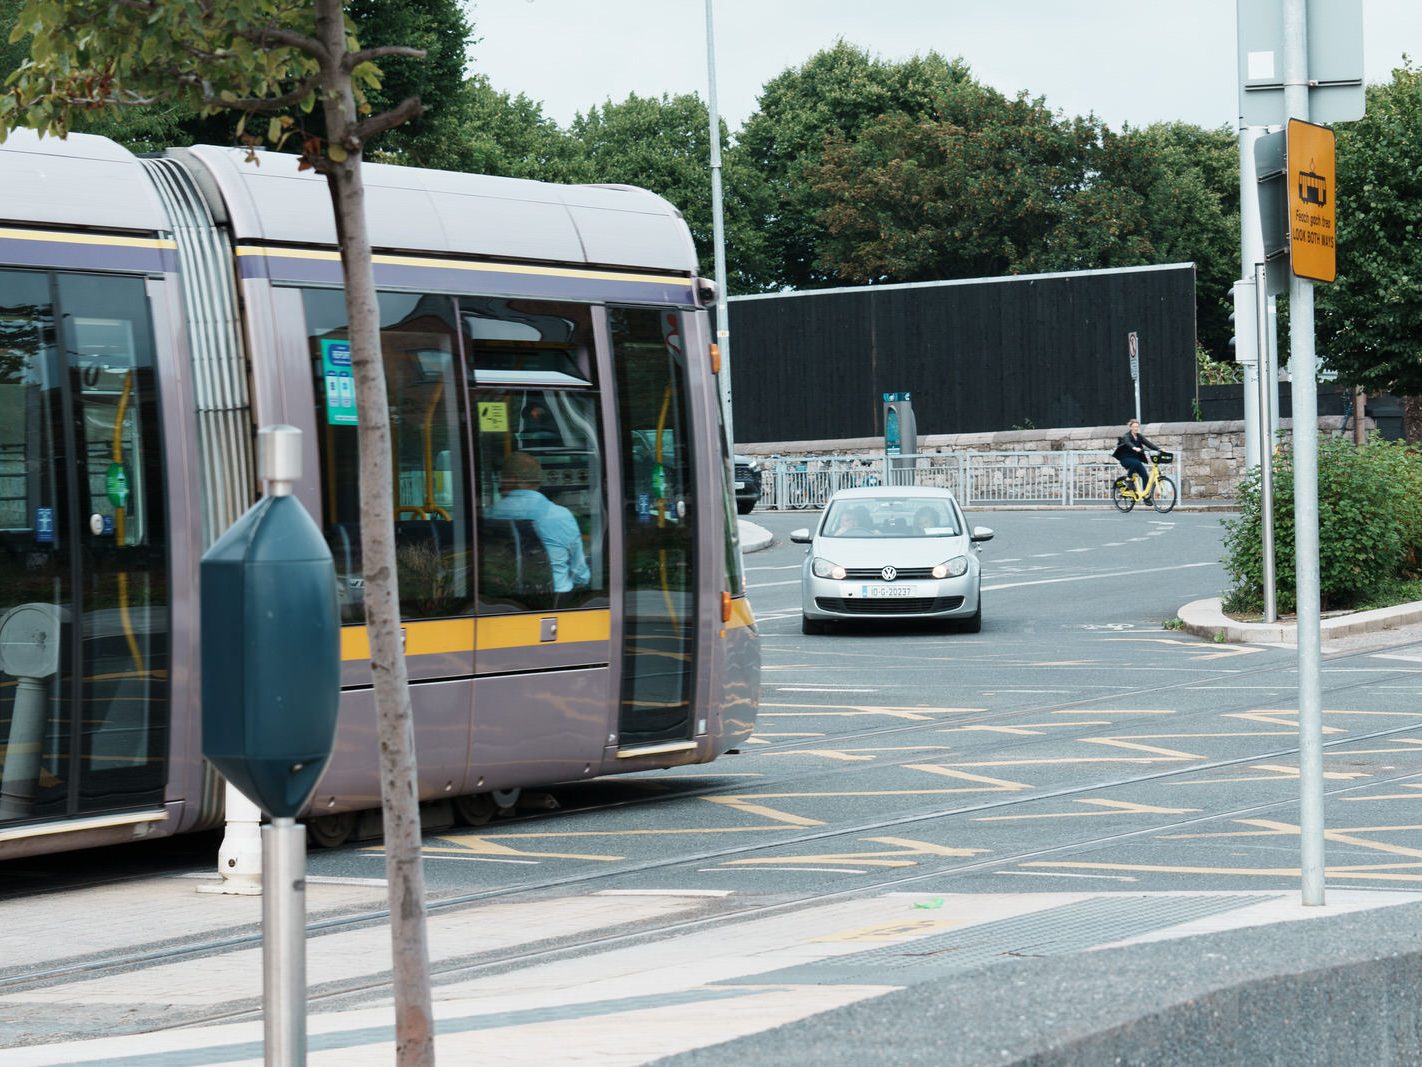 PUBLIC TRANSPORT AT BROADSTONE [RANDOM IMAGES OF LUAS TRAMS ARRIVING AND LEAVING] 003